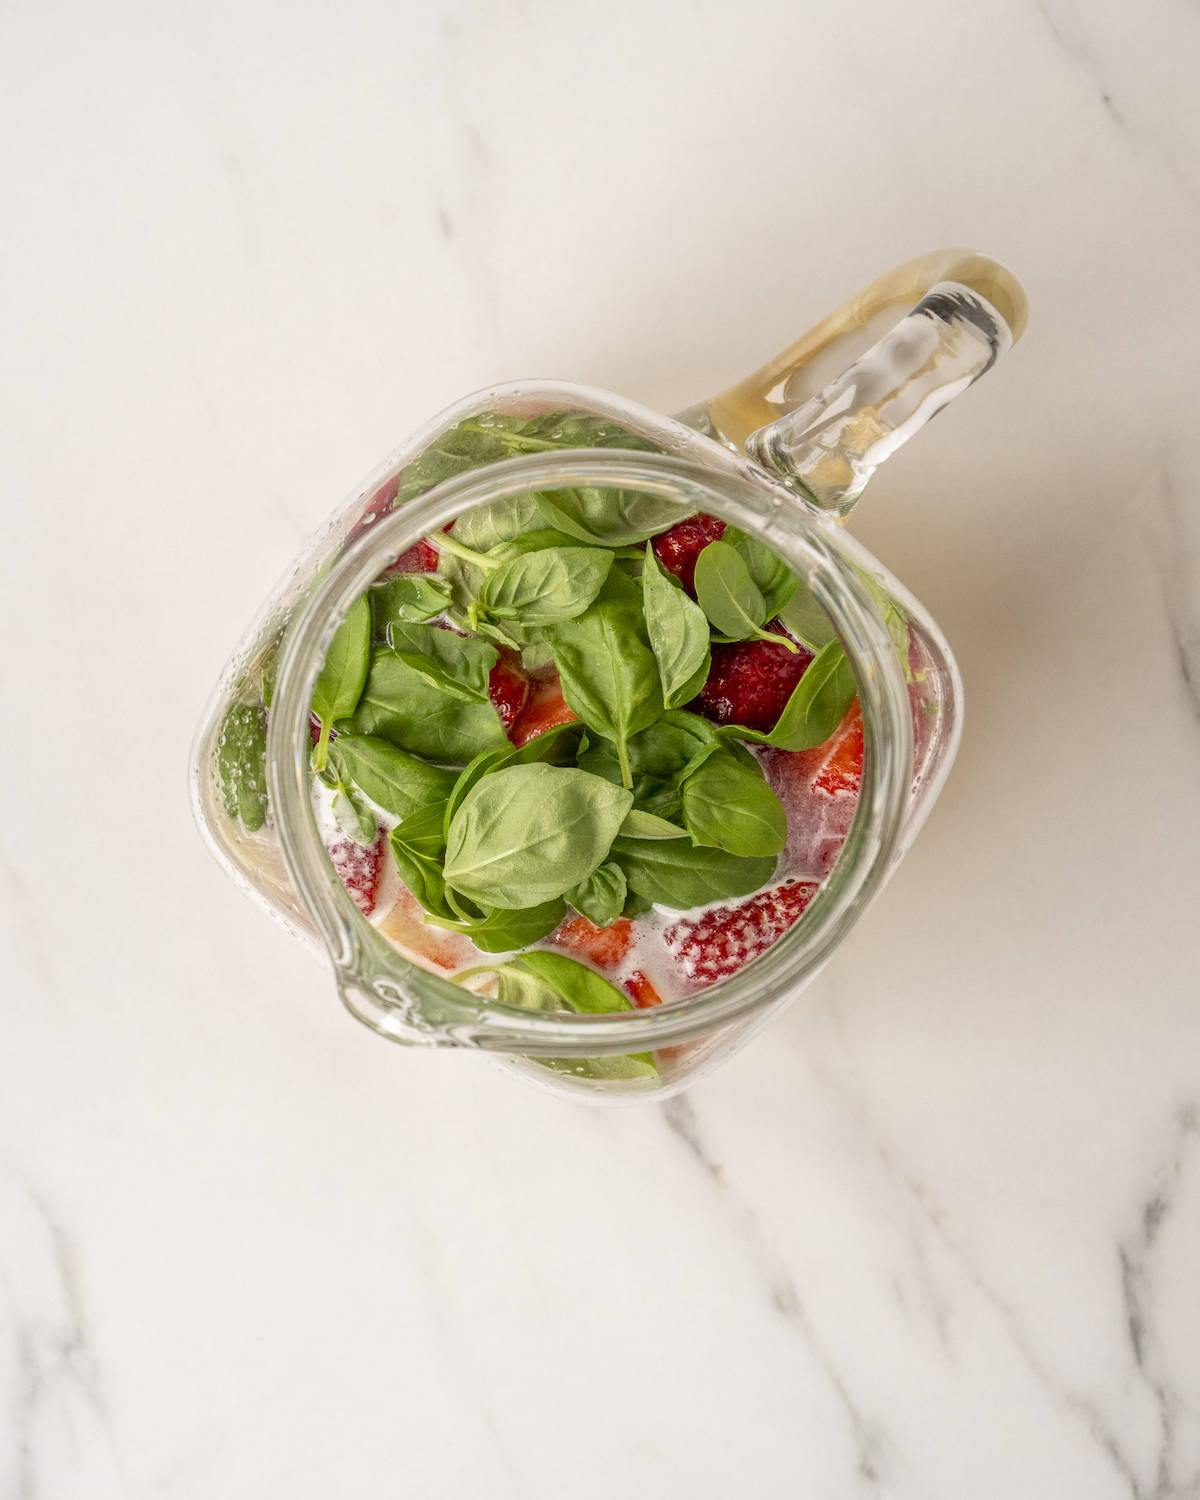 Lemon juice and dissolved sugar with strawberries and basil leaves in a glass pitcher on a white countertop.